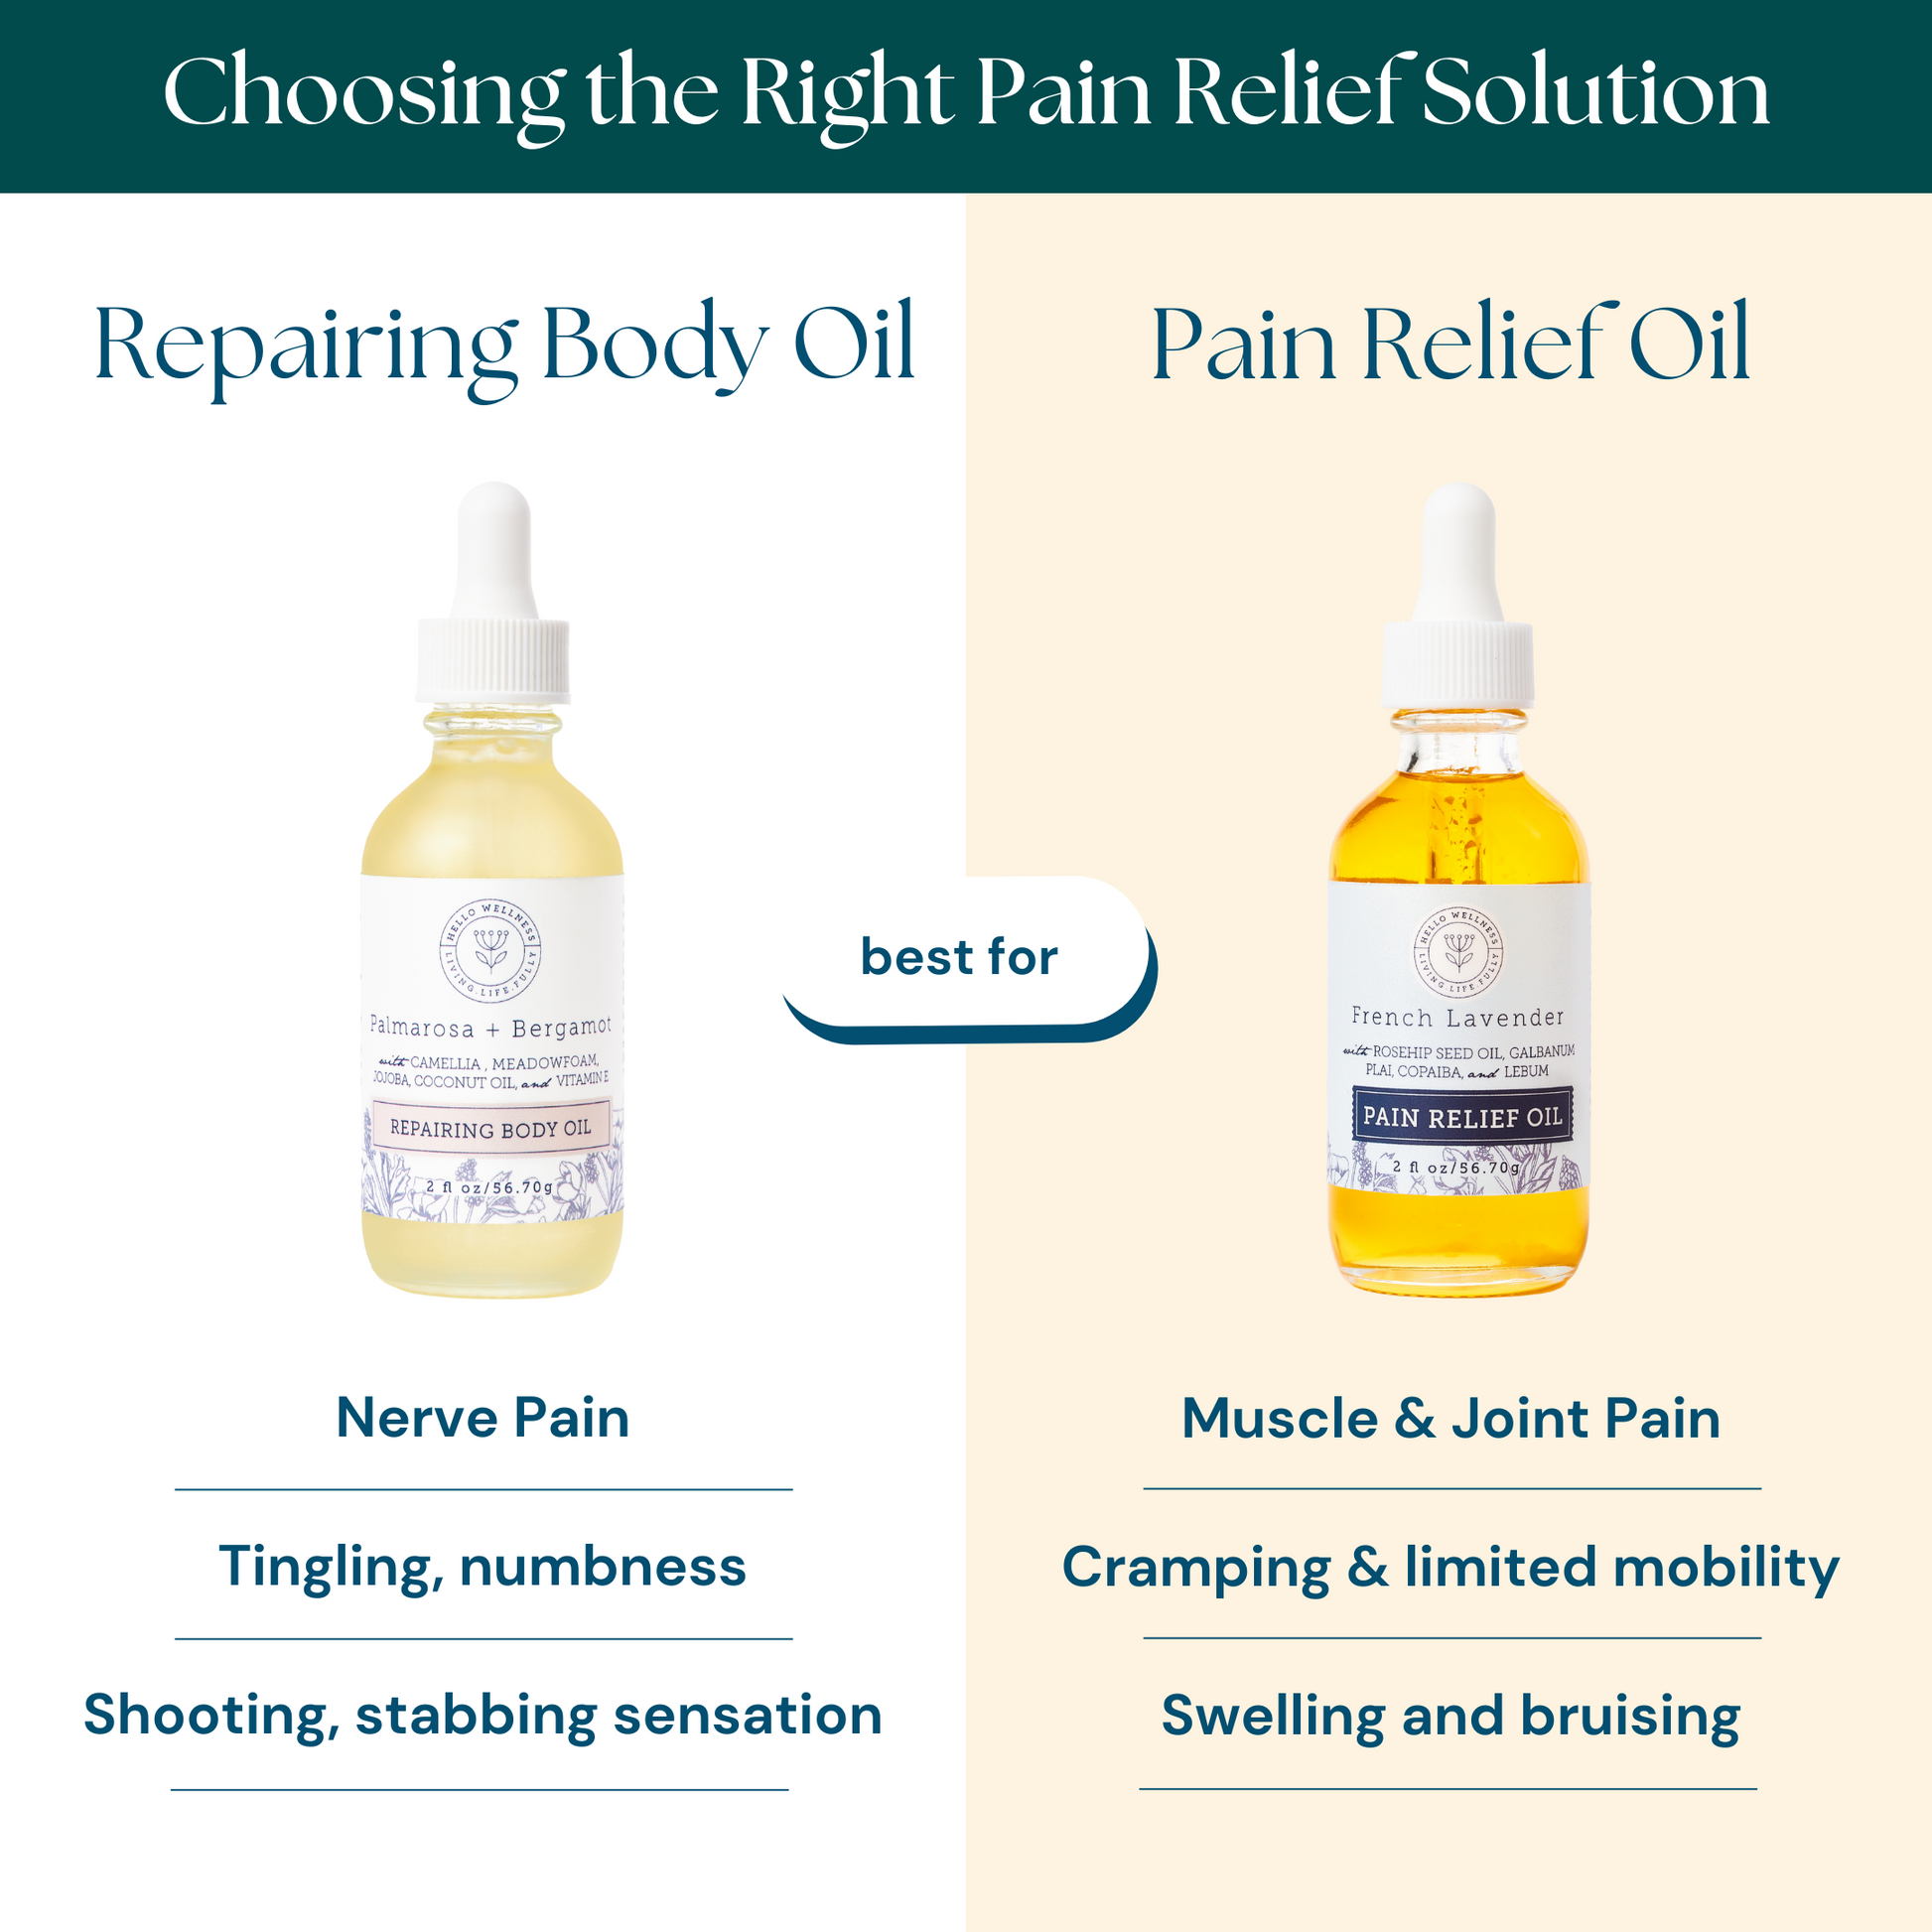 Repairing Body oil for nerve pain or Pain Relief Oil for Muscle & Joint Pain